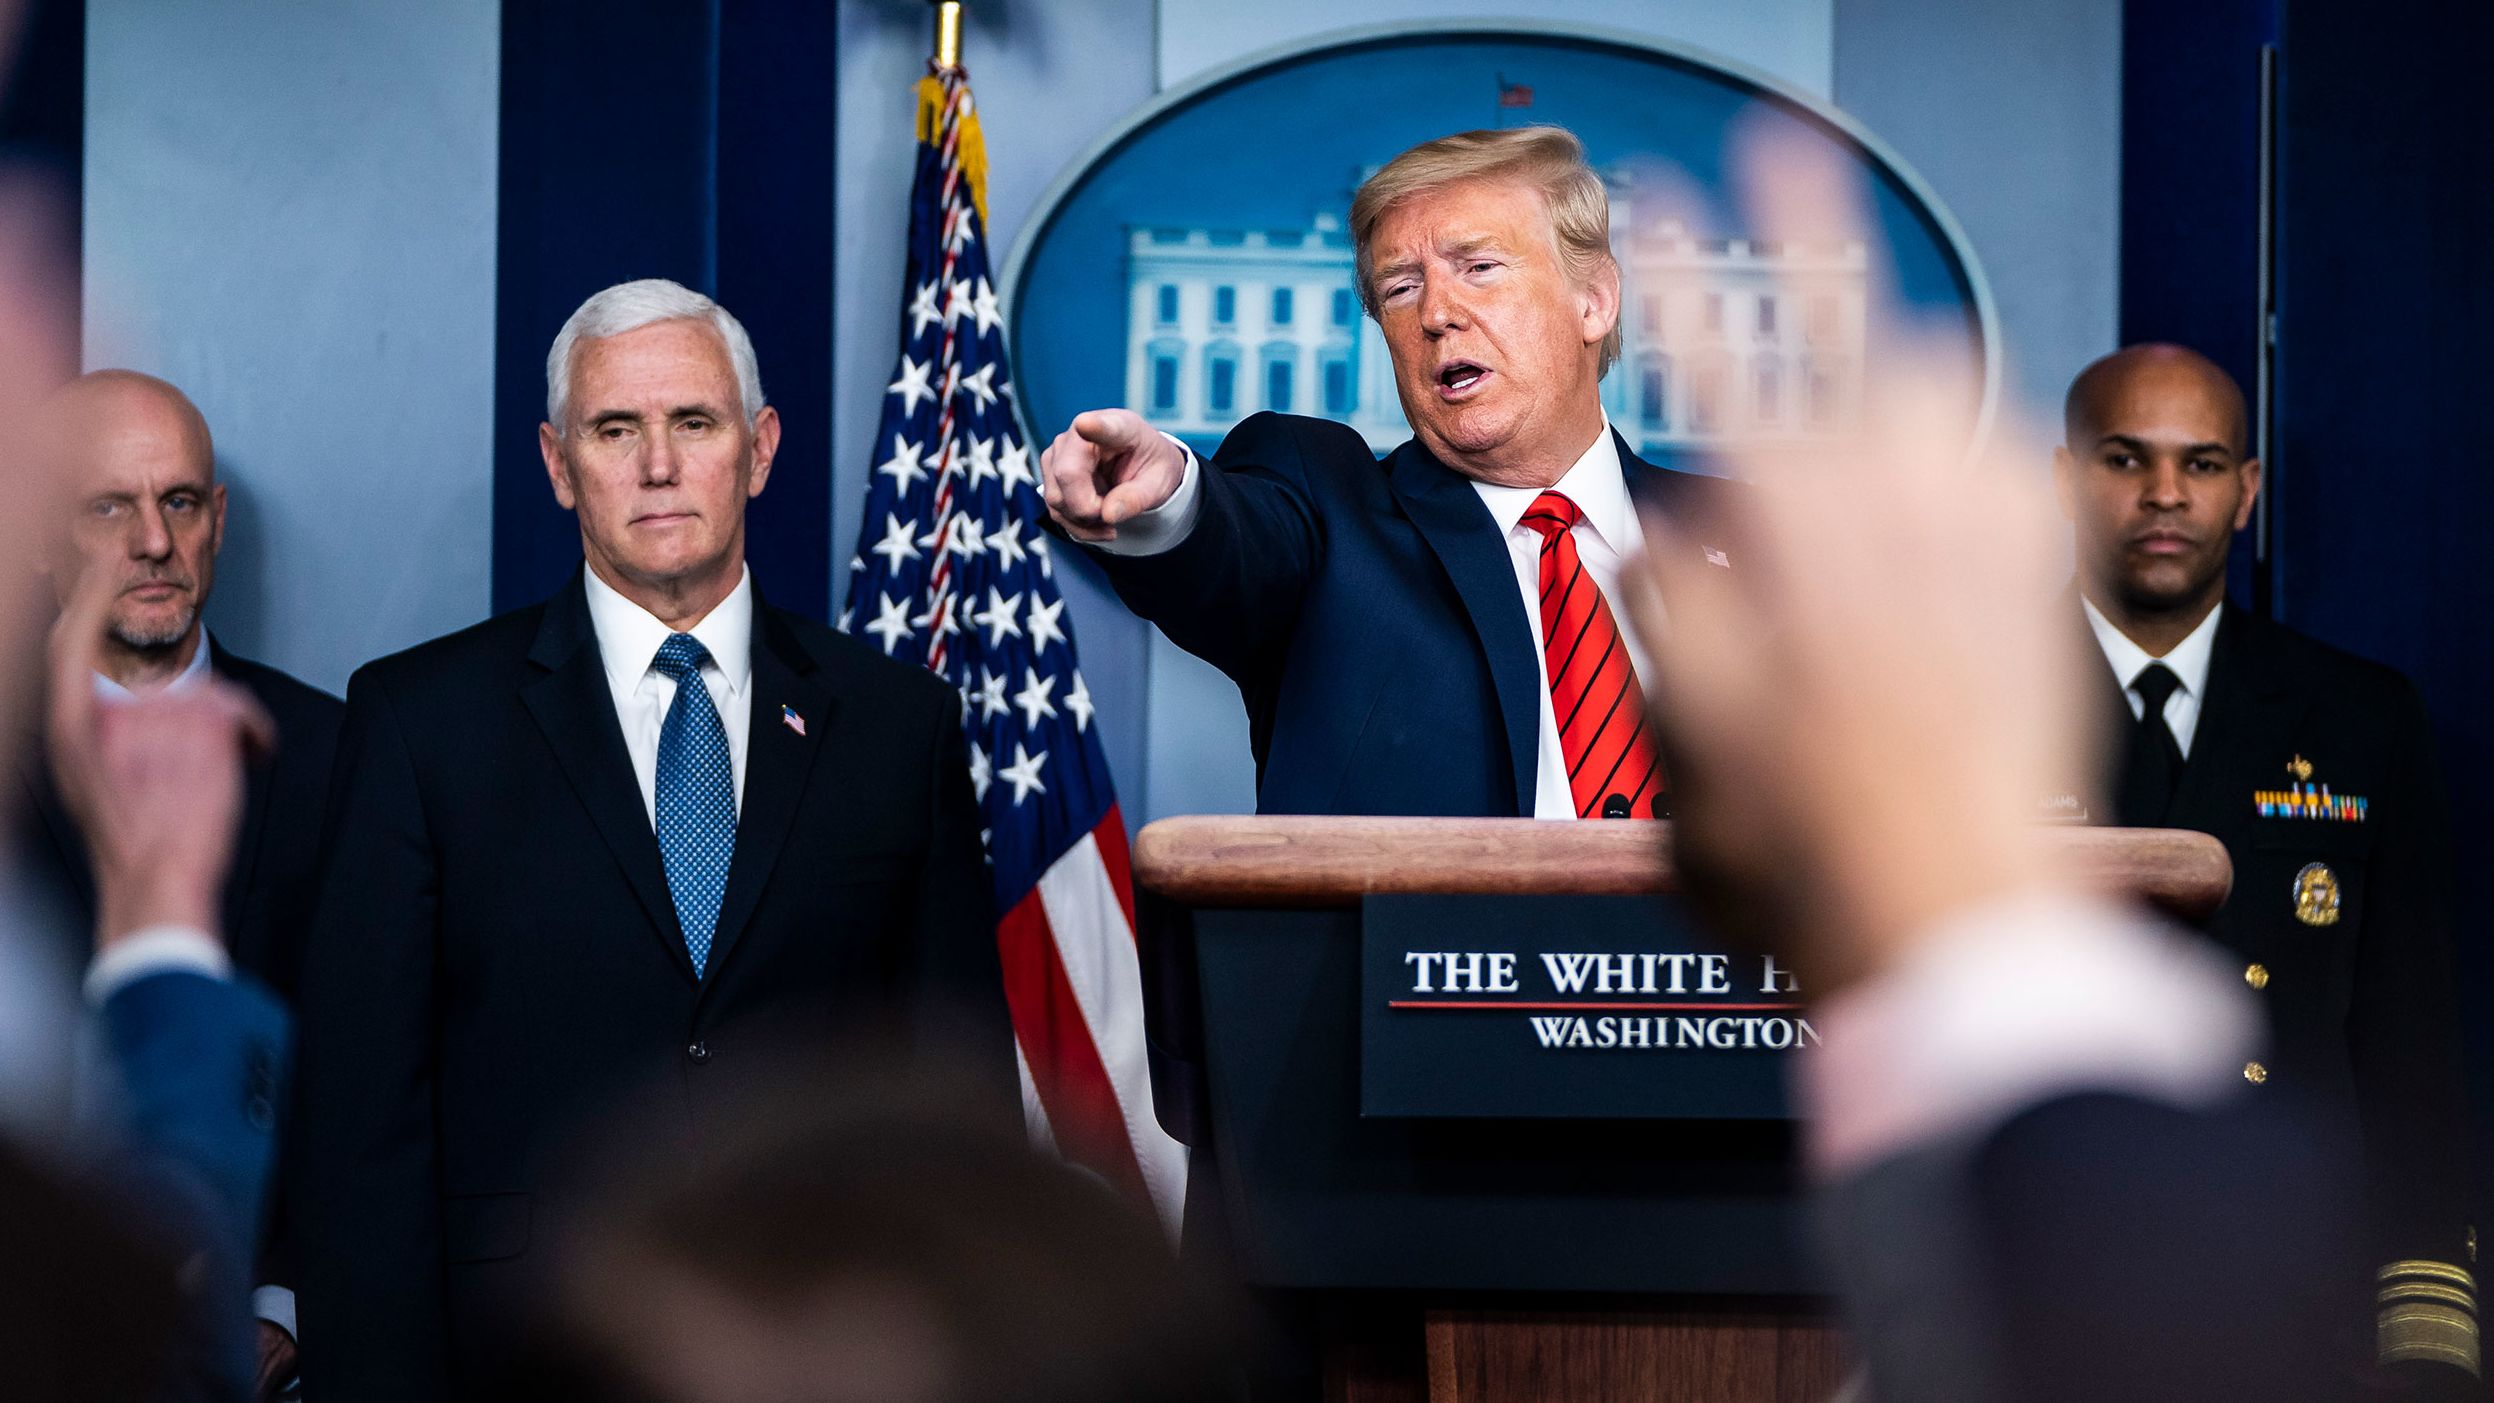 President Donald J. Trump speaks with his coronavirus task force in response to the COVID-19 coronavirus pandemic during a briefing in the James S. Brady Press Briefing Room at the White House on Thursday, March 19, 2020 in Washington, DC.